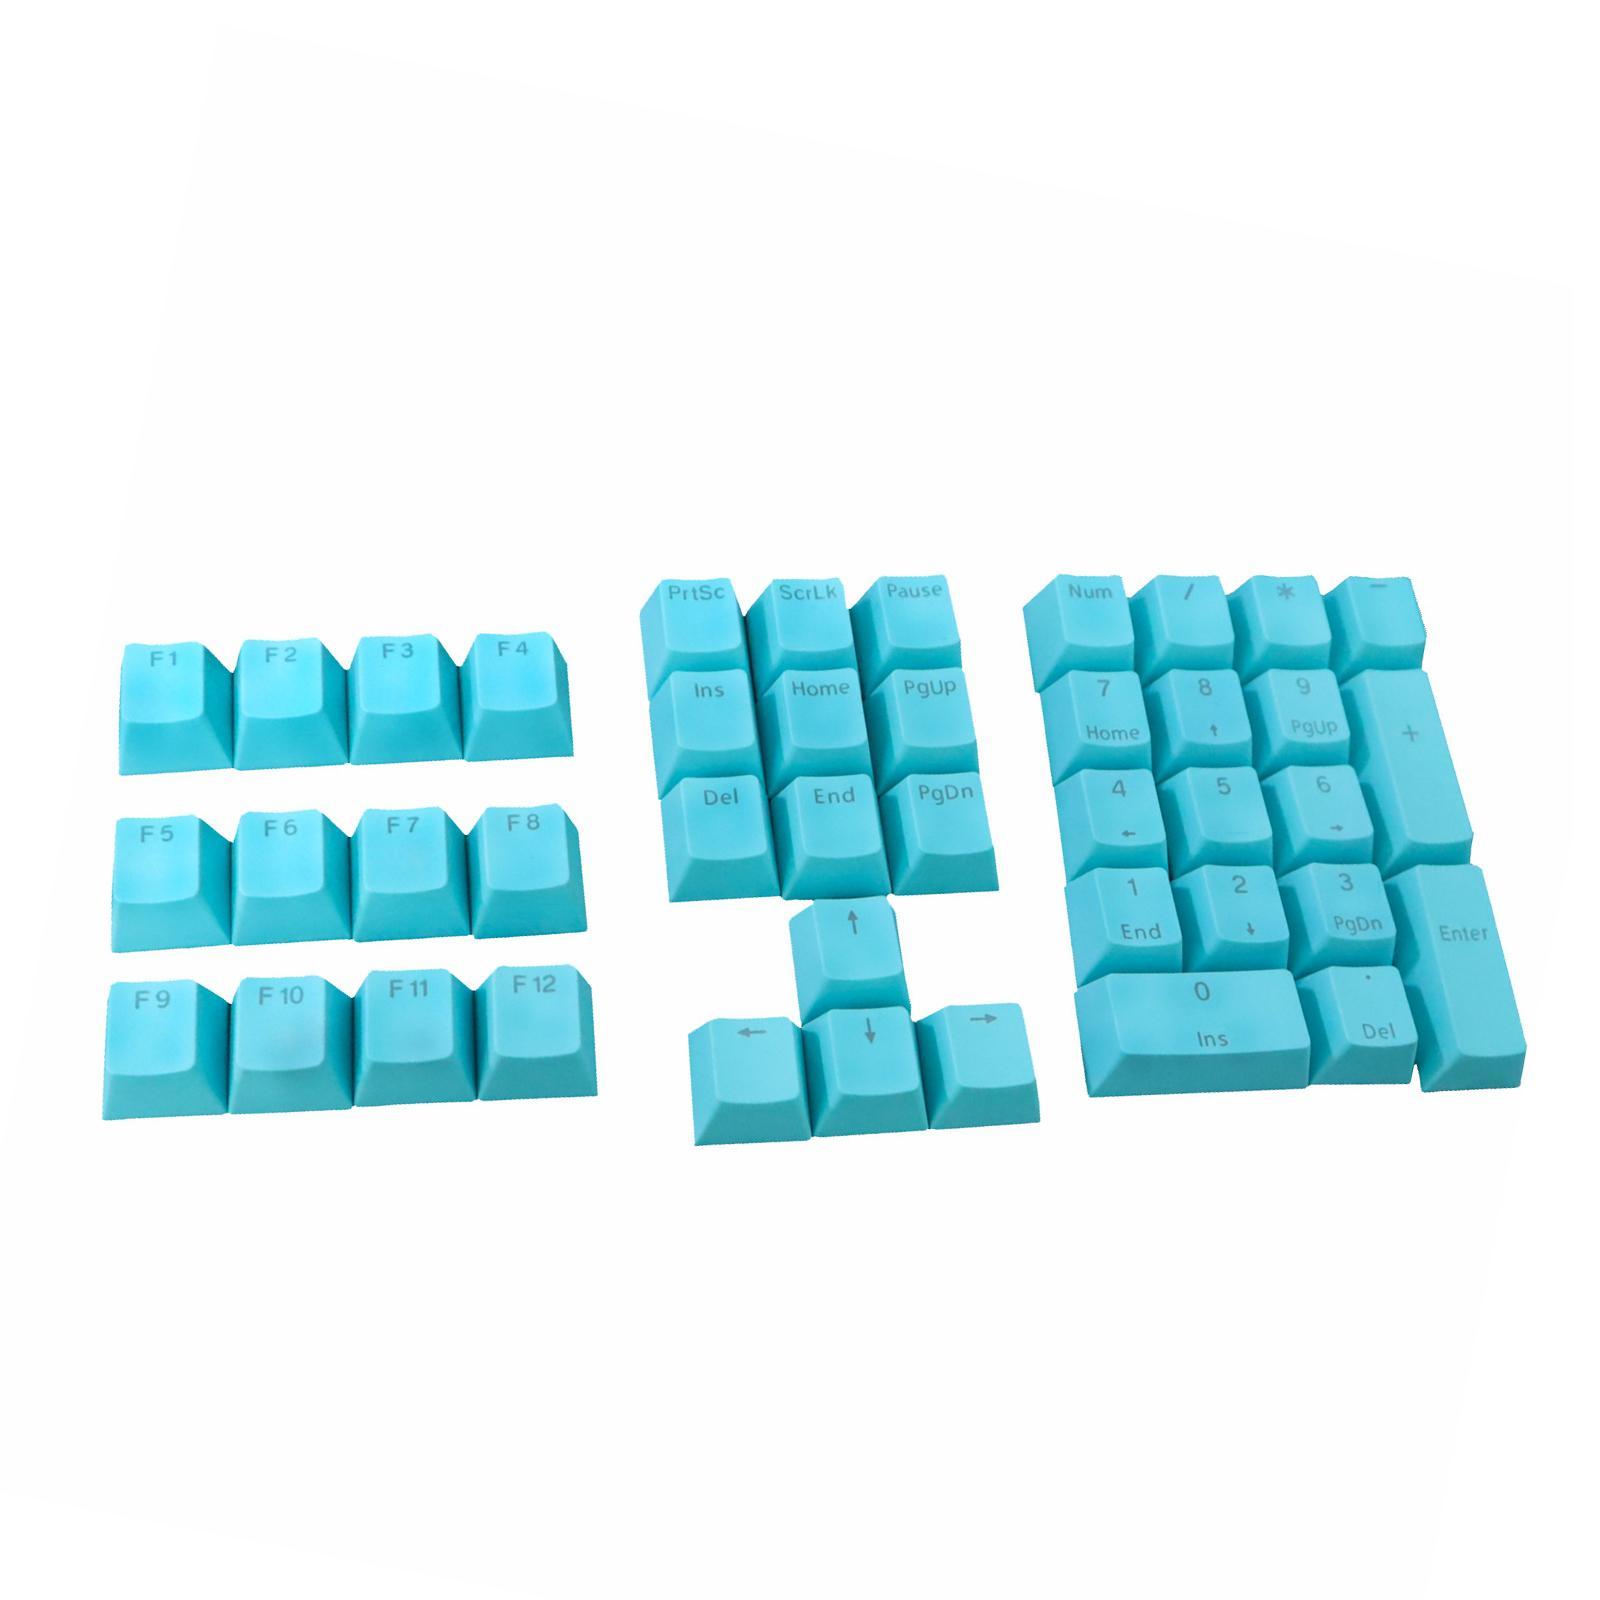 DIY PBT Key Caps Cover  for Cherry Mechanical Keyboard 42 Keycaps Blue